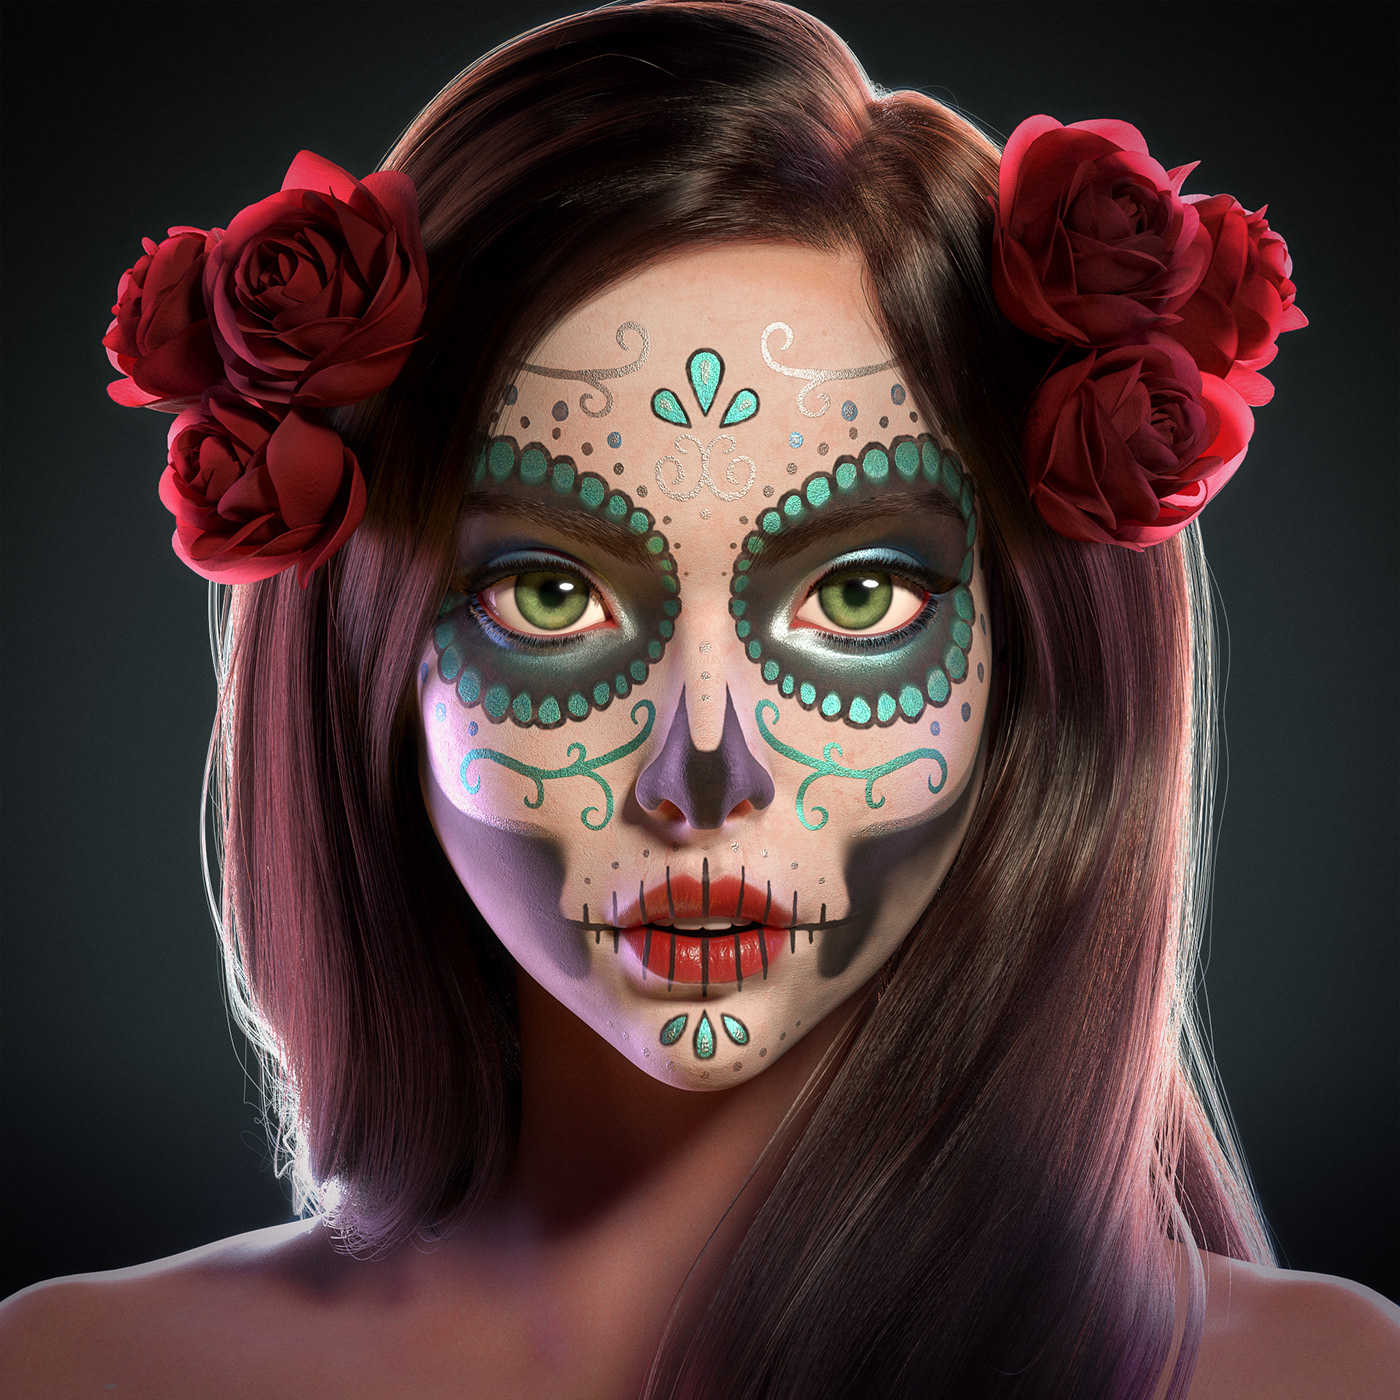 3D 3d modeling 3d render cartoon catrina character modeling day of the dead makeup stylized